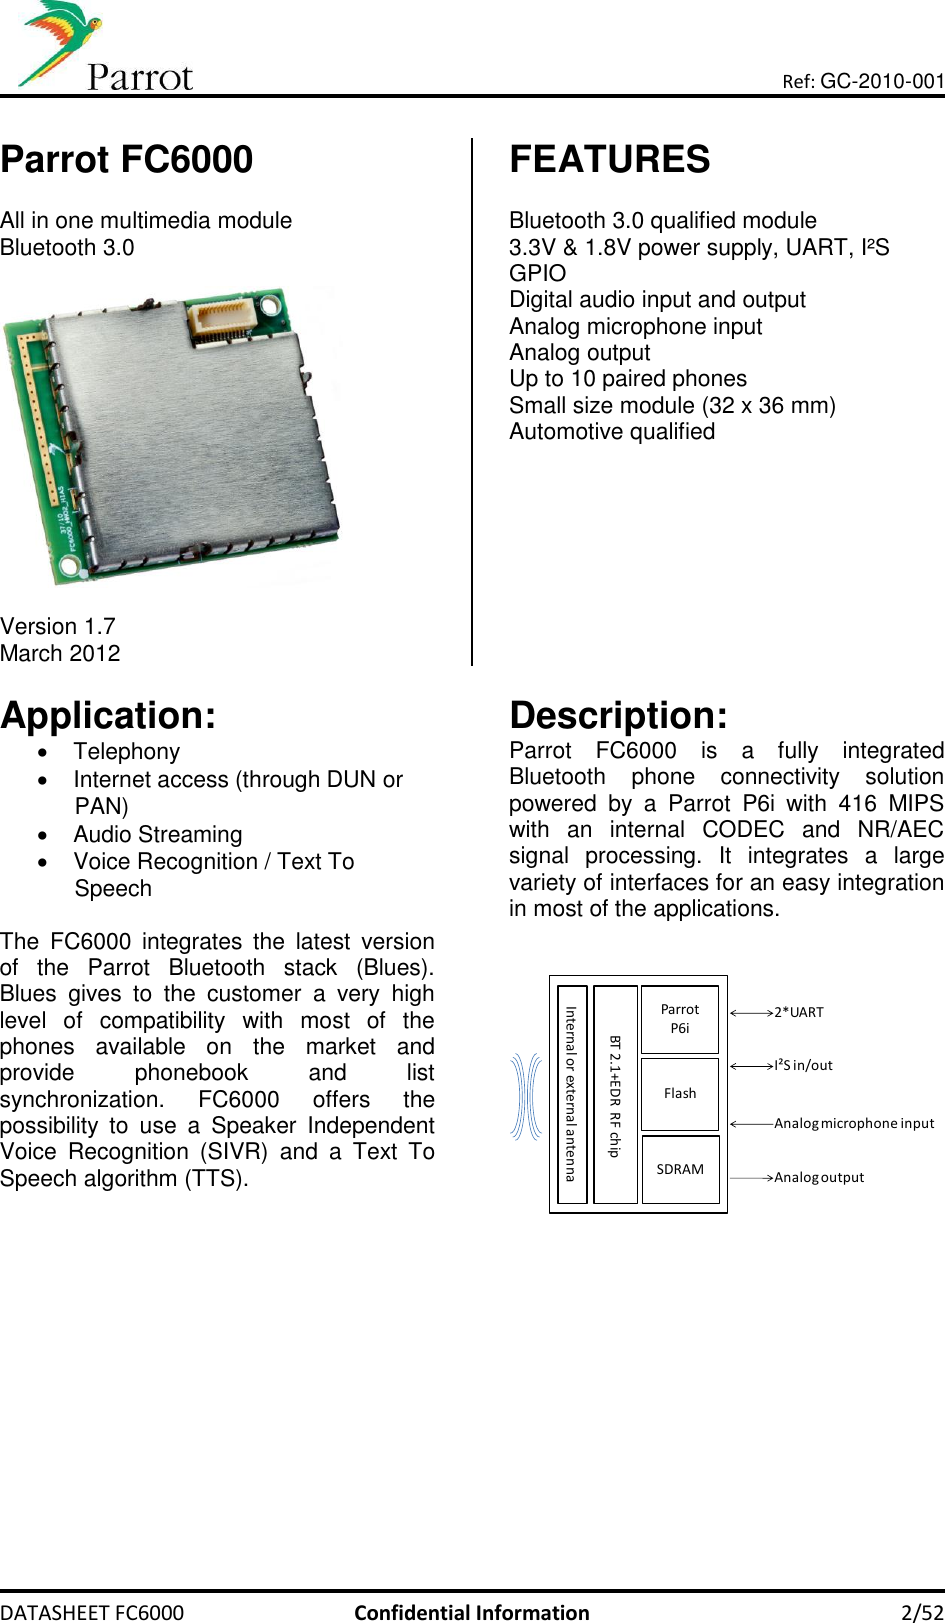       DATASHEET FC6000  Confidential Information  2/52 Ref: GC-2010-001  Parrot FC6000  All in one multimedia module Bluetooth 3.0    Version 1.7 March 2012 FEATURES  Bluetooth 3.0 qualified module 3.3V &amp; 1.8V power supply, UART, I²S  GPIO Digital audio input and output Analog microphone input  Analog output Up to 10 paired phones Small size module (32 x 36 mm) Automotive qualified   Application:   Telephony   Internet access (through DUN or PAN)   Audio Streaming   Voice Recognition / Text To Speech  The  FC6000  integrates  the  latest  version of  the  Parrot  Bluetooth  stack  (Blues). Blues  gives  to  the  customer  a  very  high level  of  compatibility  with  most  of  the phones  available  on  the  market  and provide  phonebook  and  list synchronization.  FC6000  offers  the possibility  to  use  a  Speaker  Independent Voice  Recognition  (SIVR)  and  a  Text  To Speech algorithm (TTS).       Description: Parrot  FC6000  is  a  fully  integrated Bluetooth  phone  connectivity  solution powered  by  a  Parrot  P6i  with  416  MIPS with  an  internal  CODEC  and  NR/AEC signal  processing.  It  integrates  a  large variety of interfaces for an easy integration in most of the applications.    ParrotP6iFlashSDRAMBT 2.1+EDR  RF chipInternal or external antenna2*UARTI²S in/outAnalog microphone inputAnalog output     